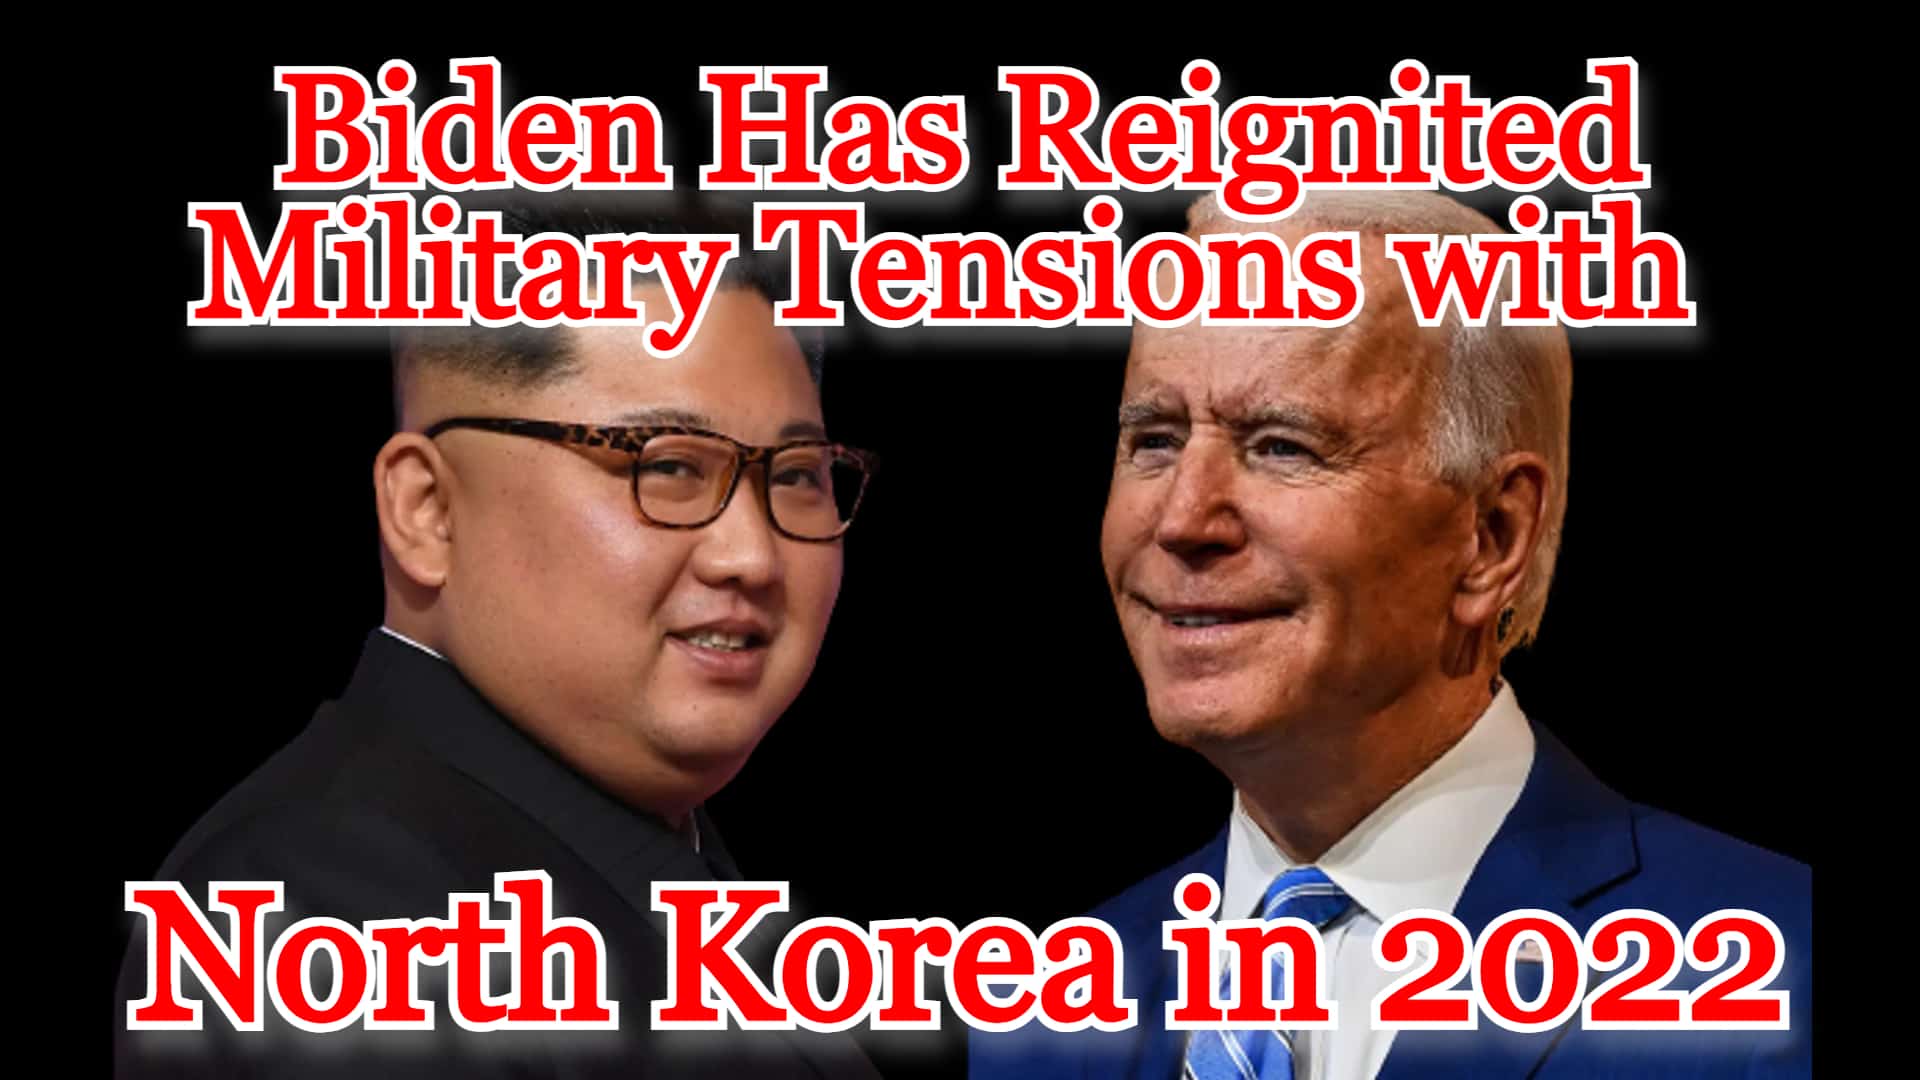 COI #366: Biden Has Reignited Military Tensions with North Korea in 2022